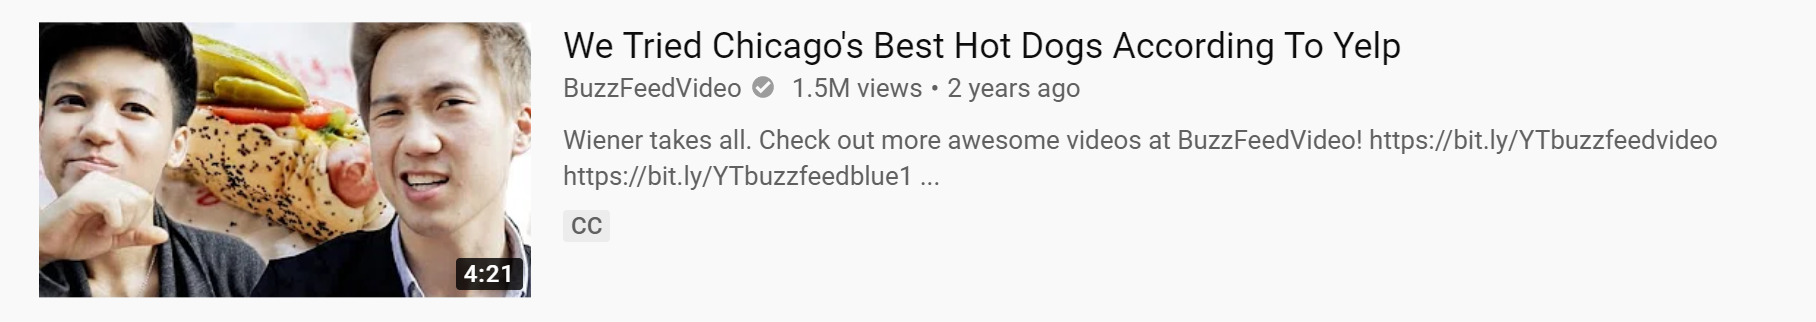 Video thumbnail example from BuzzFeed